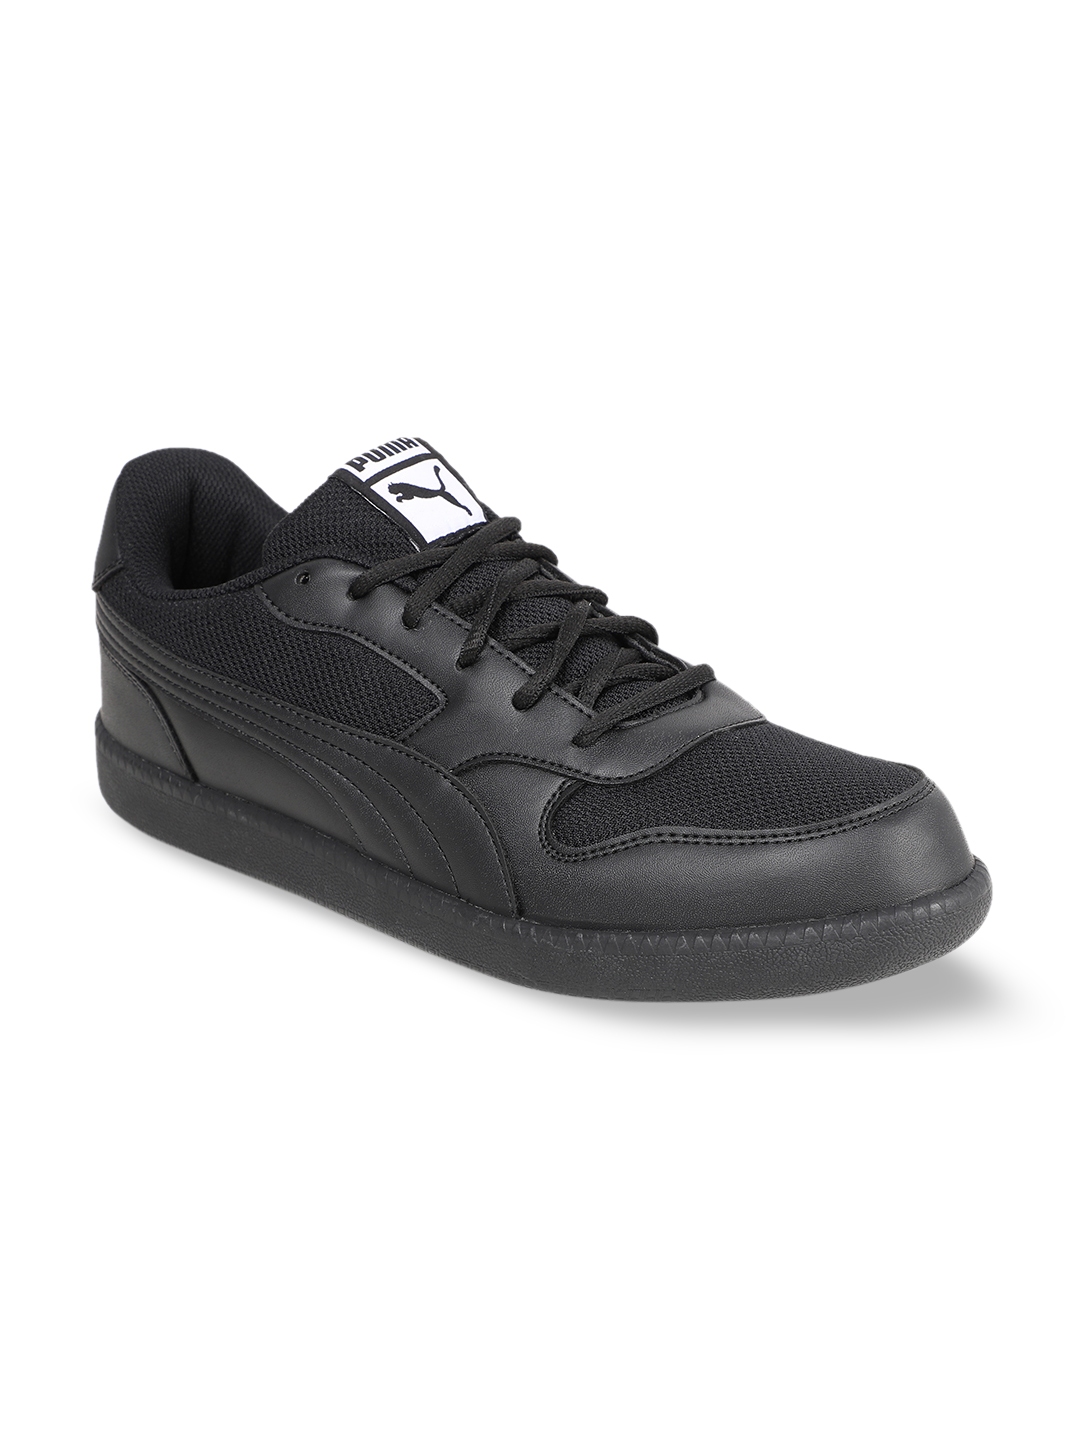 Buy Puma Unisex Black Sneakers - Casual Shoes for Unisex 11206546 | Myntra